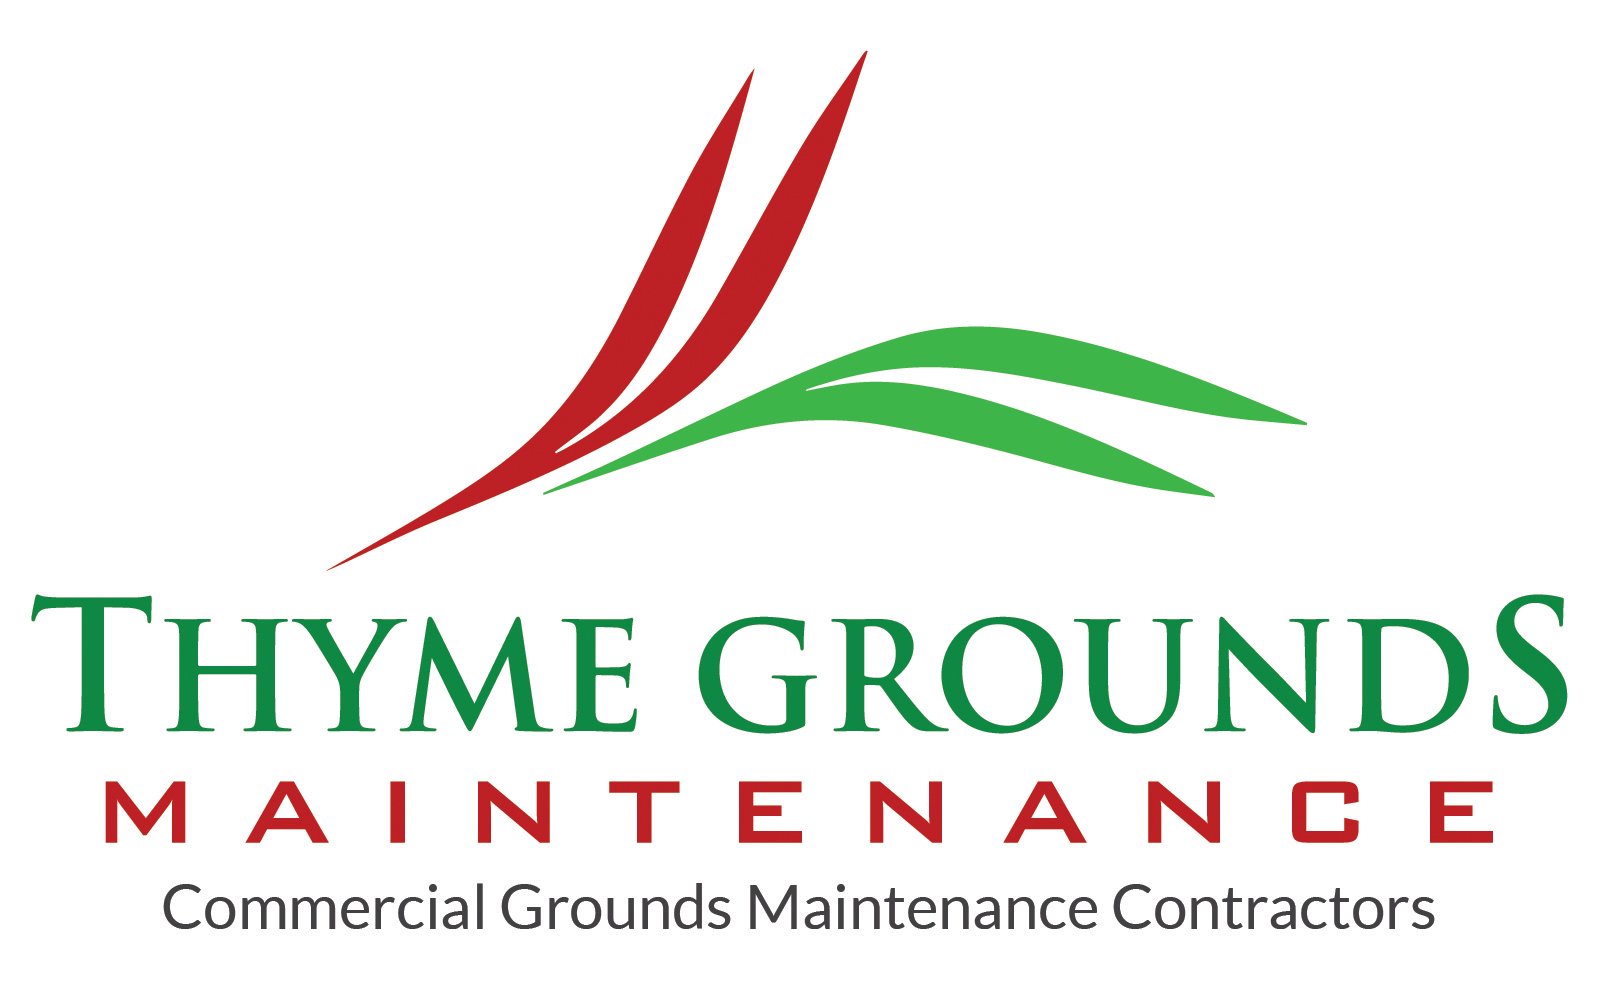 Thyme Grounds Maintenance